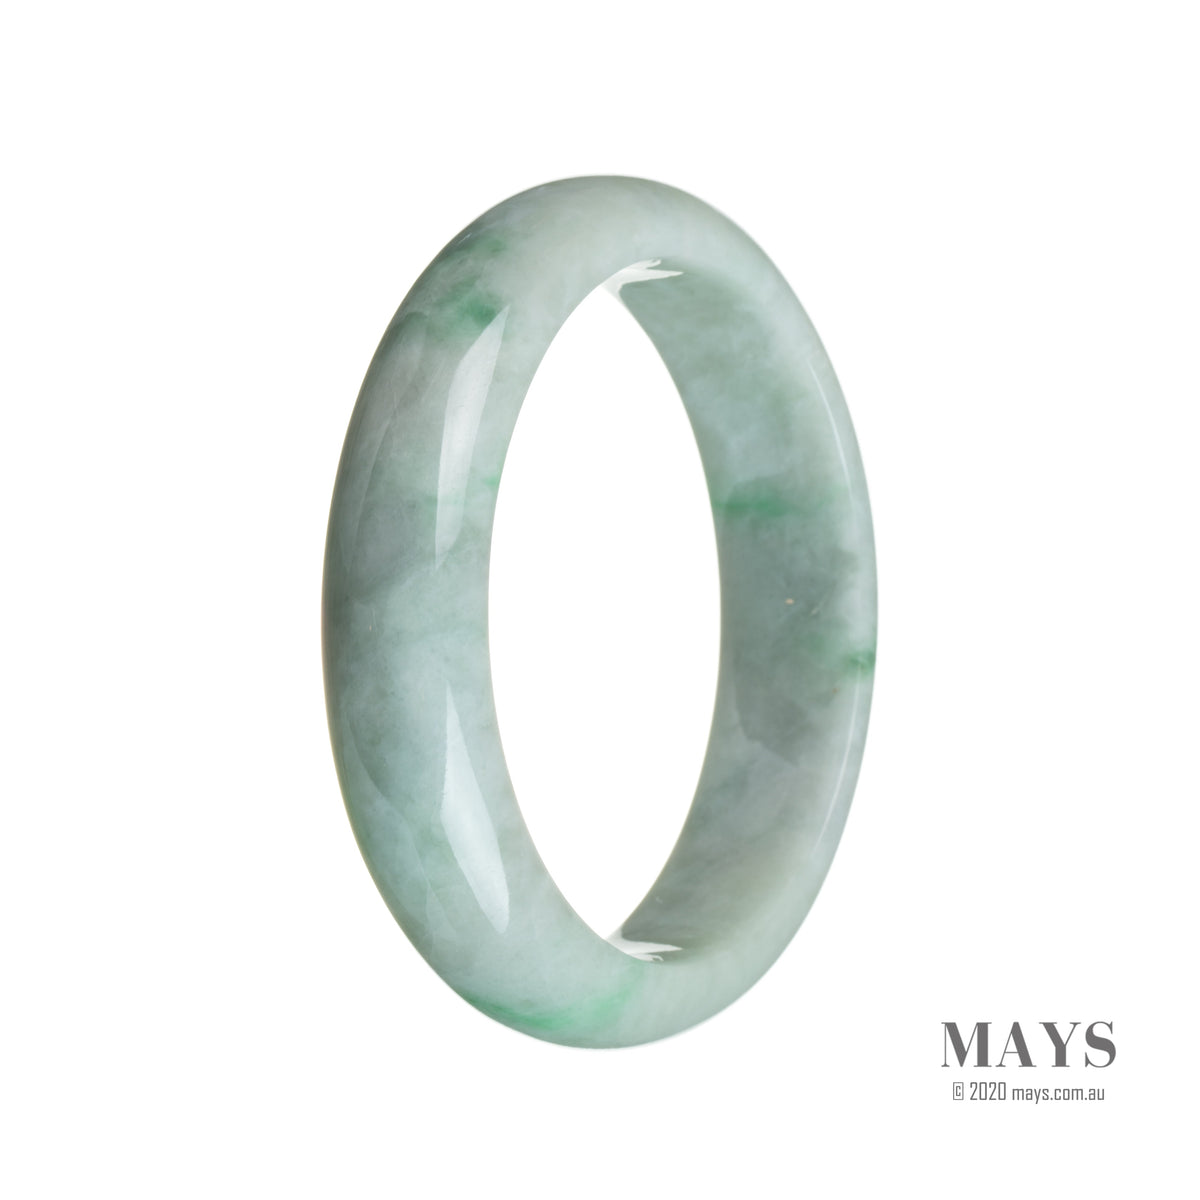 A close-up image of a beautiful green and white jadeite bangle bracelet. The bracelet is made from untreated jadeite, showcasing its natural and authentic beauty. The bangle features a half moon shape and has a diameter of 58mm. Perfect for adding a touch of elegance to any outfit.